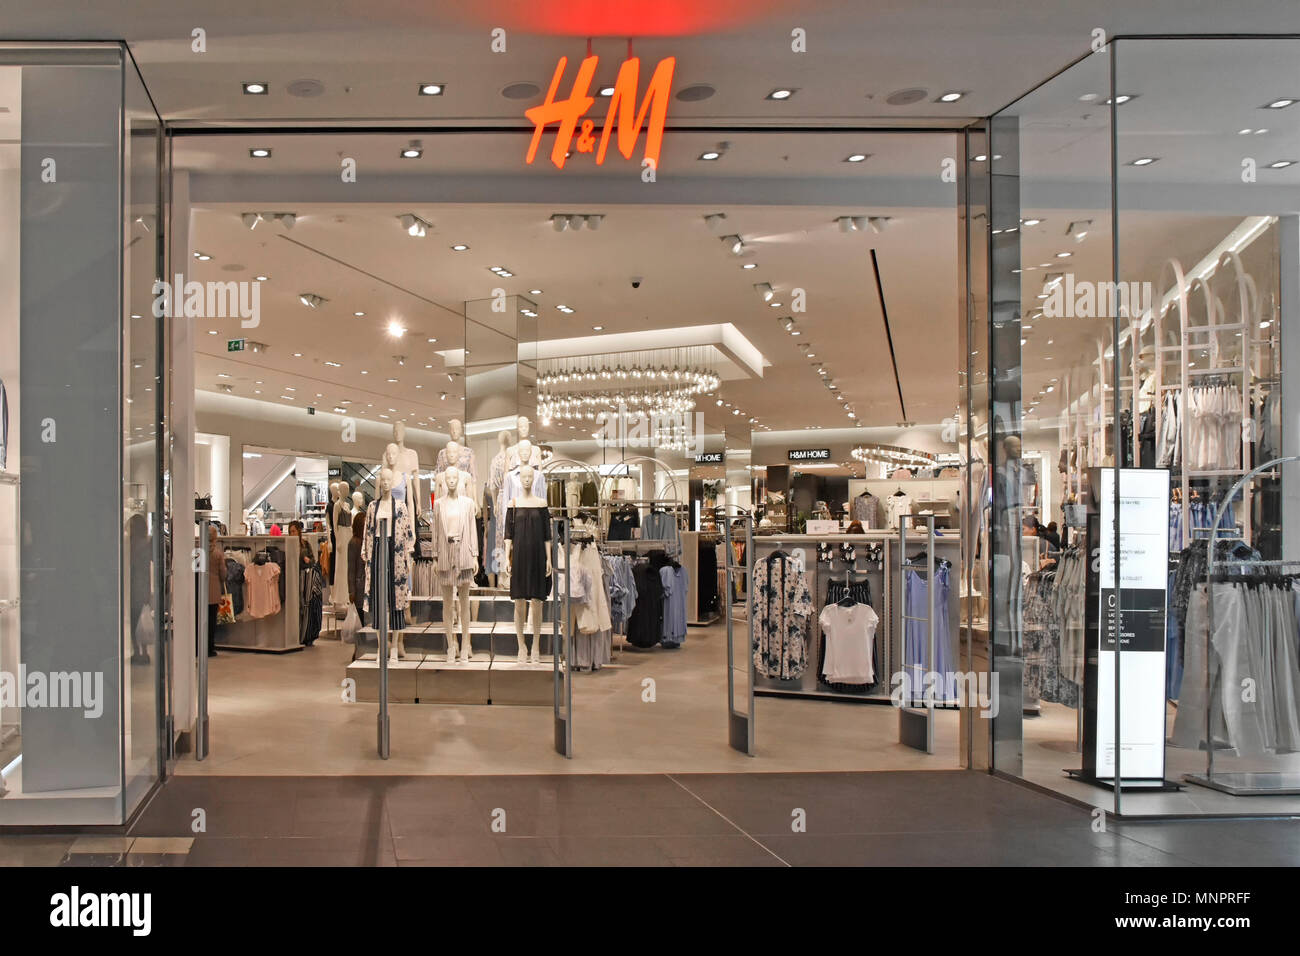 Shopping Mall early morning entrance & interior design of H&M clothing  store mannequin displays & shoppers amongst racks Westfield Stratford  London UK Stock Photo - Alamy